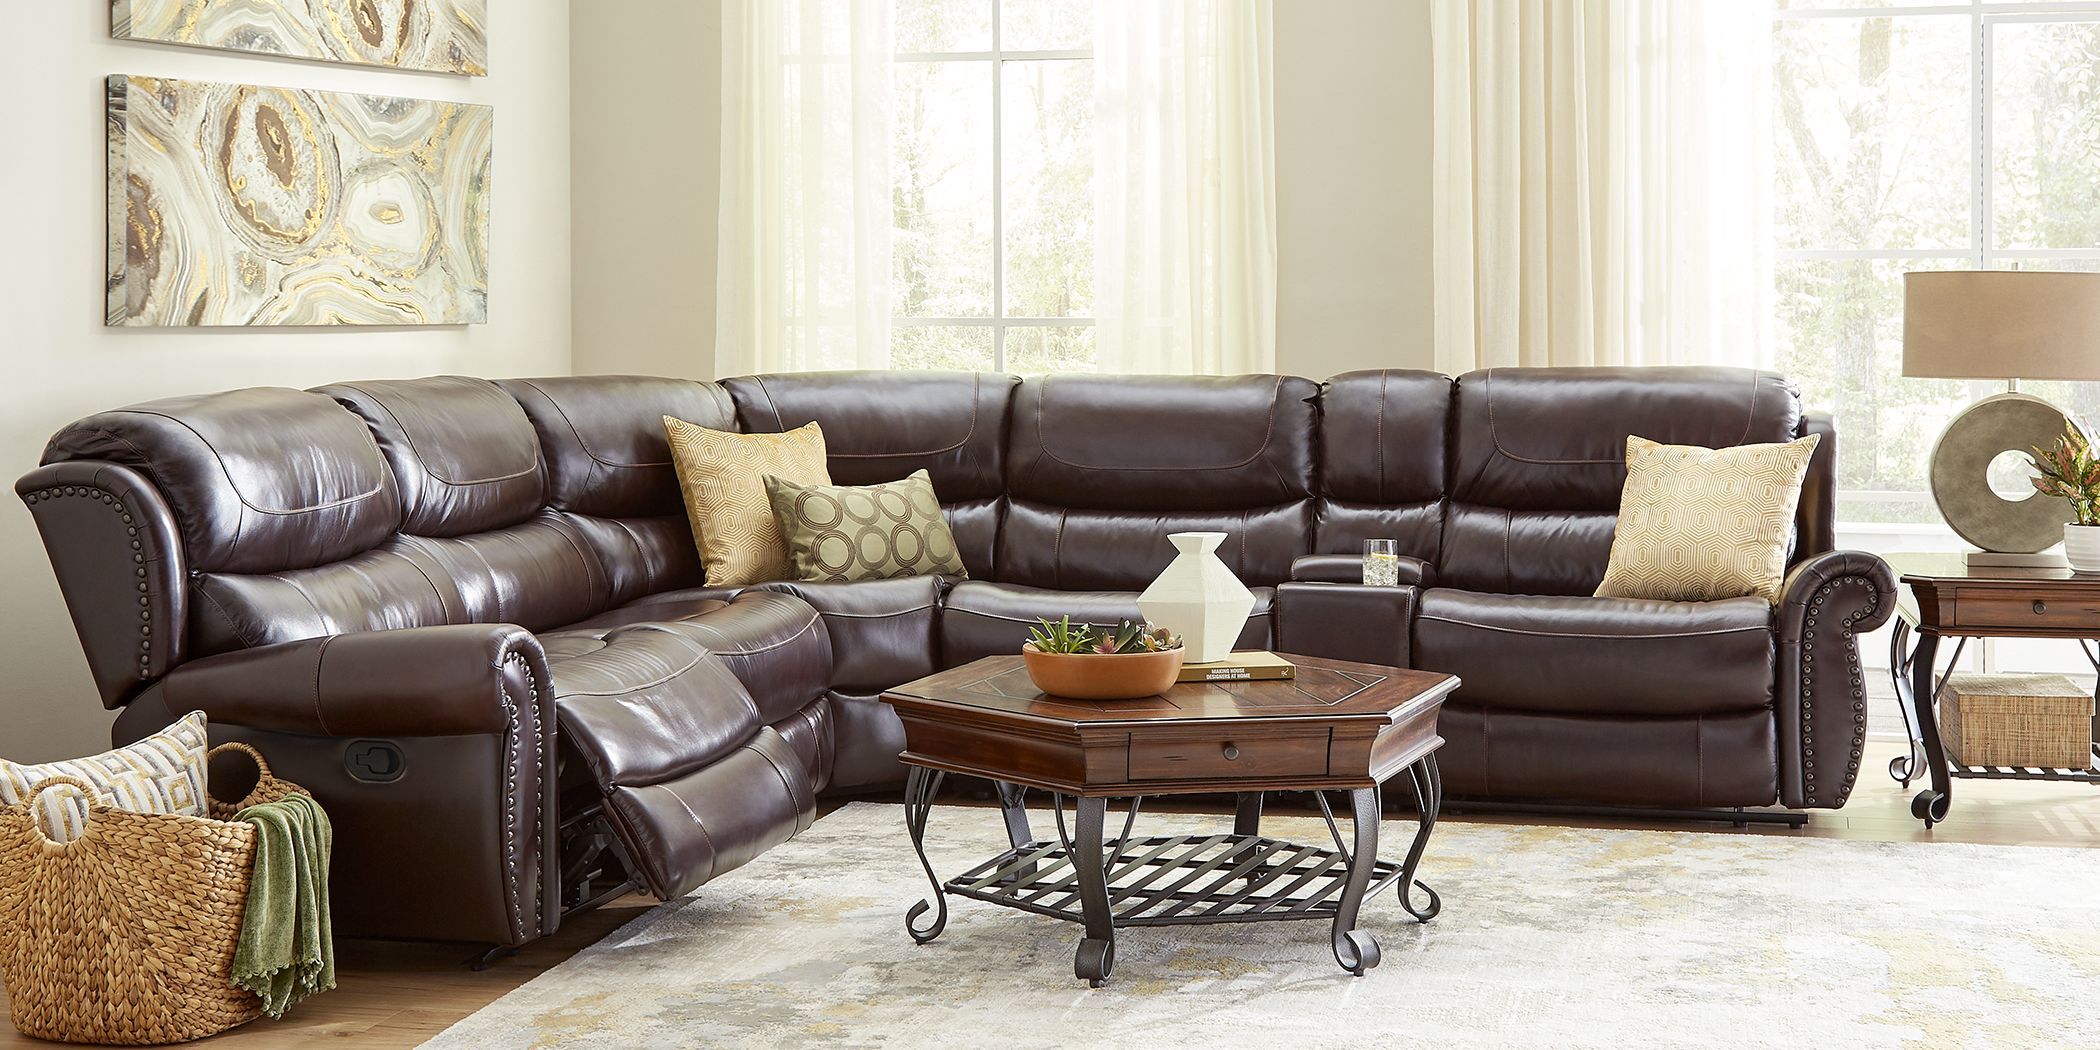 2-pc leather sectional sofa